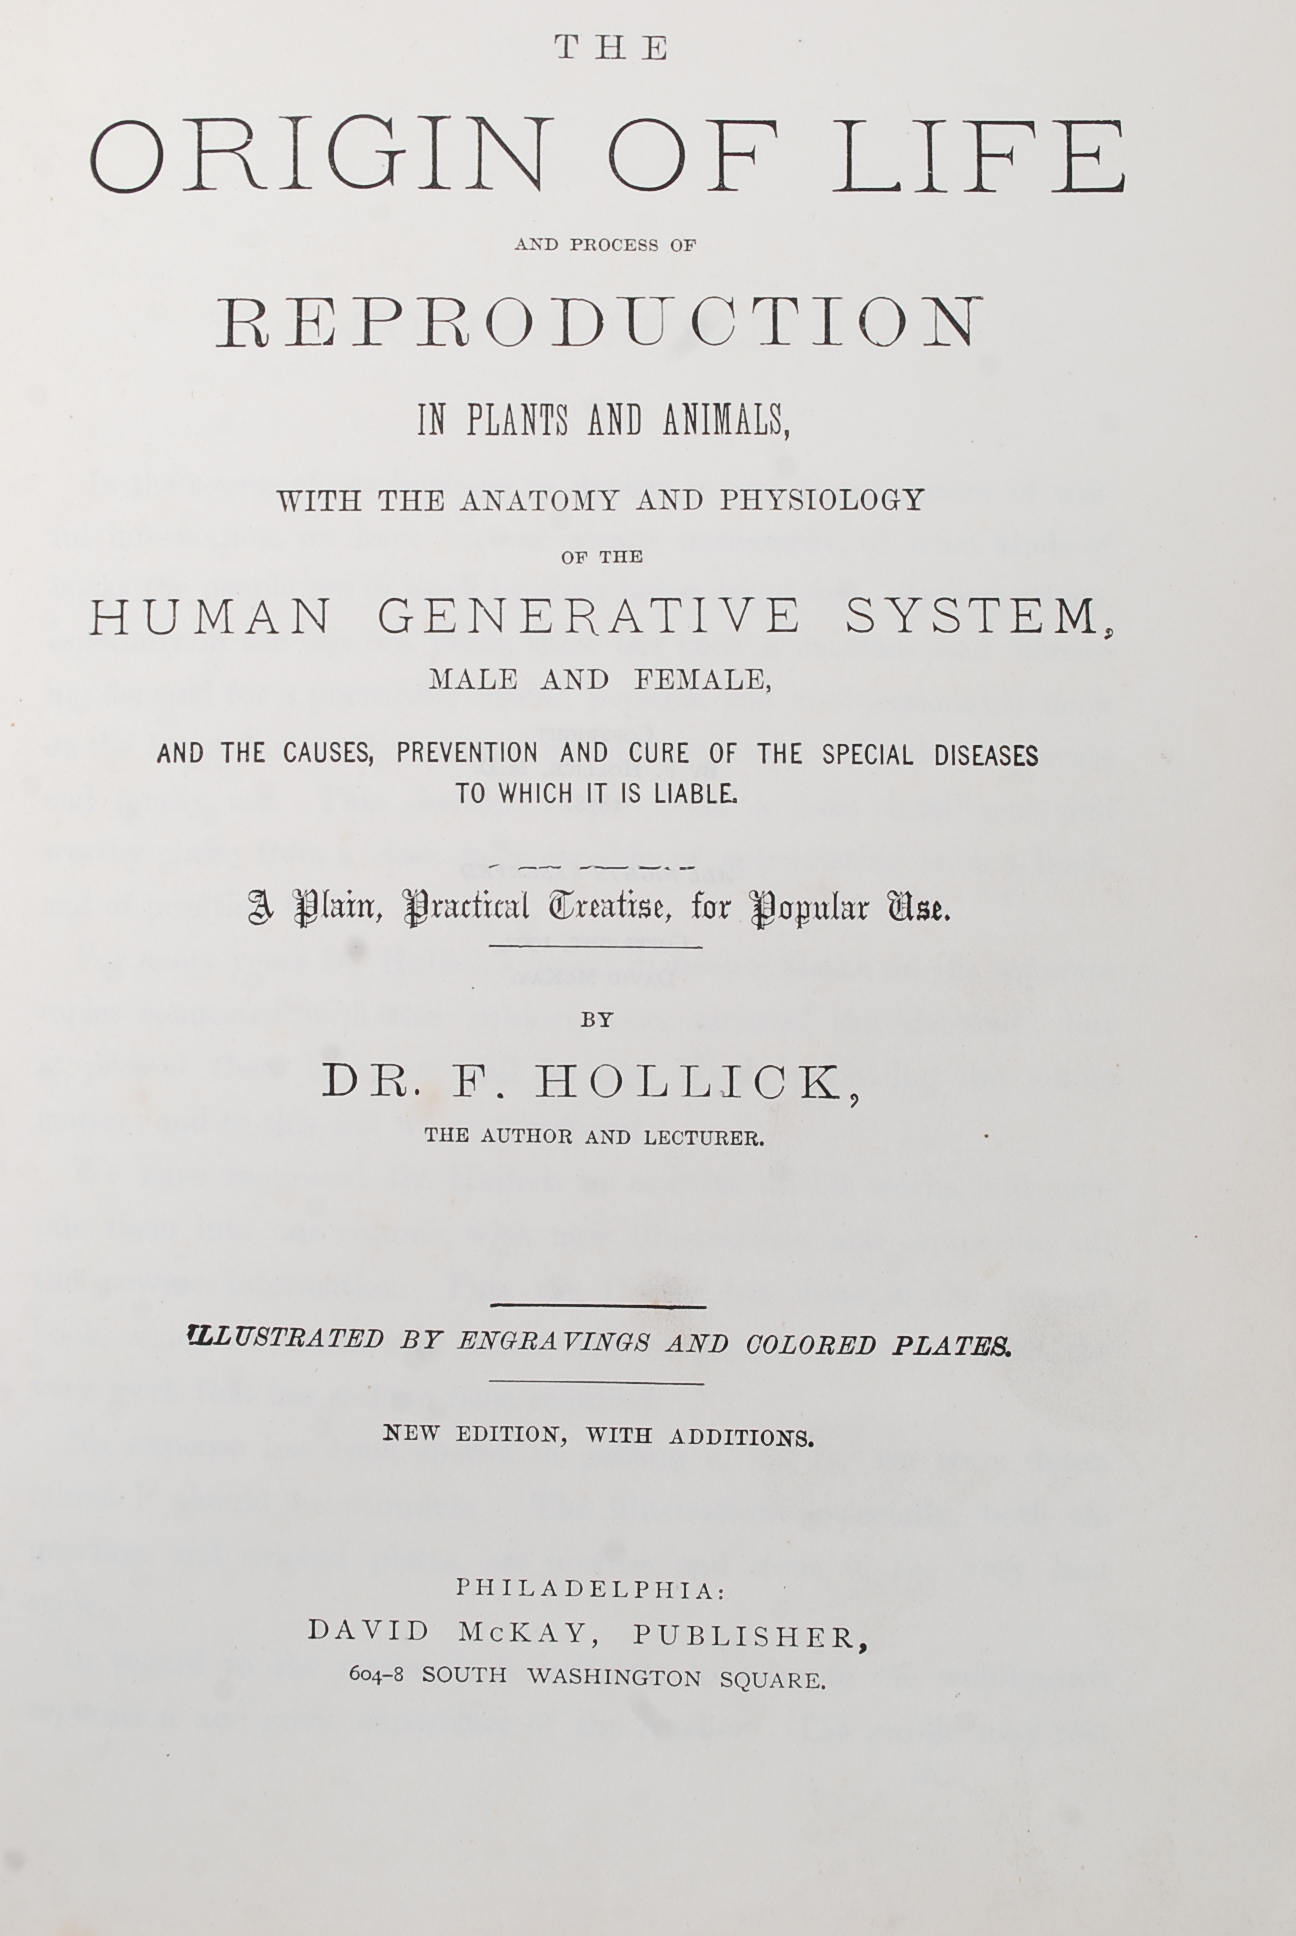 Dr. Hollick's Complete Works 1902, The o - Image 4 of 6